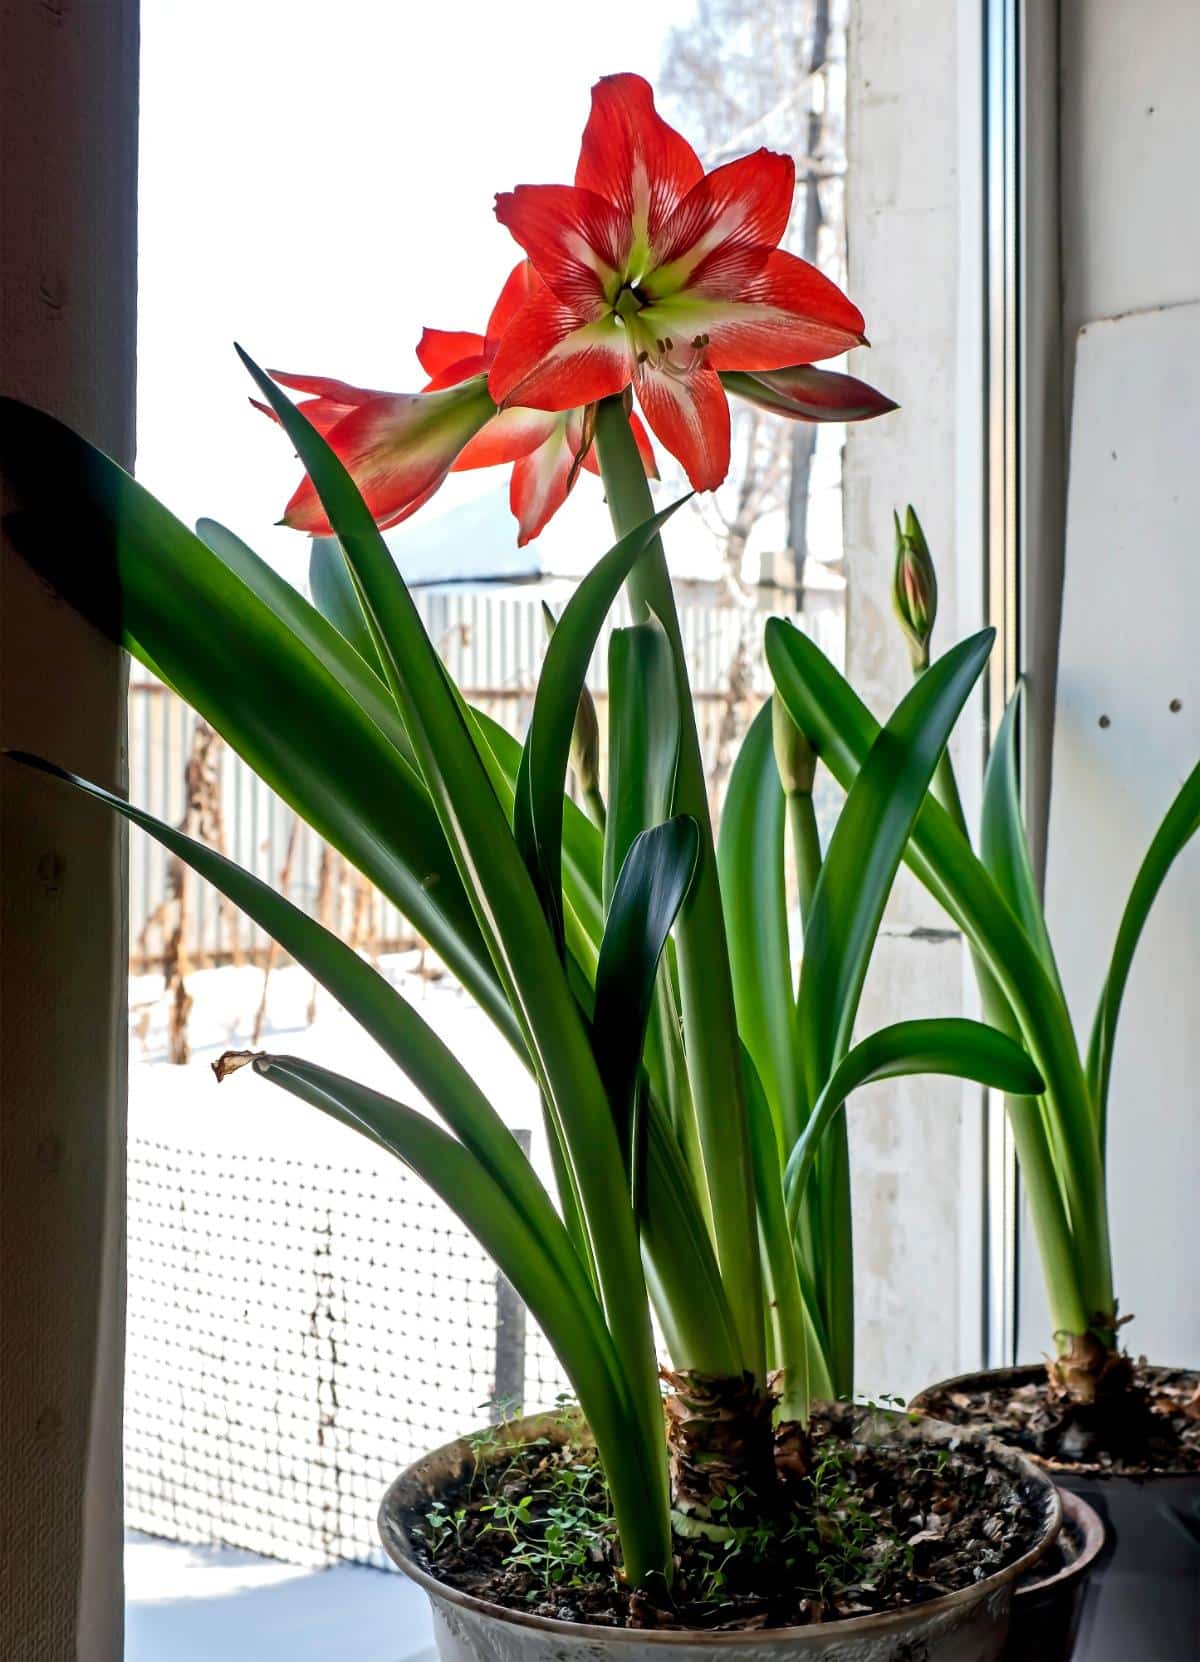 Amaryllis plants at different flowering stages